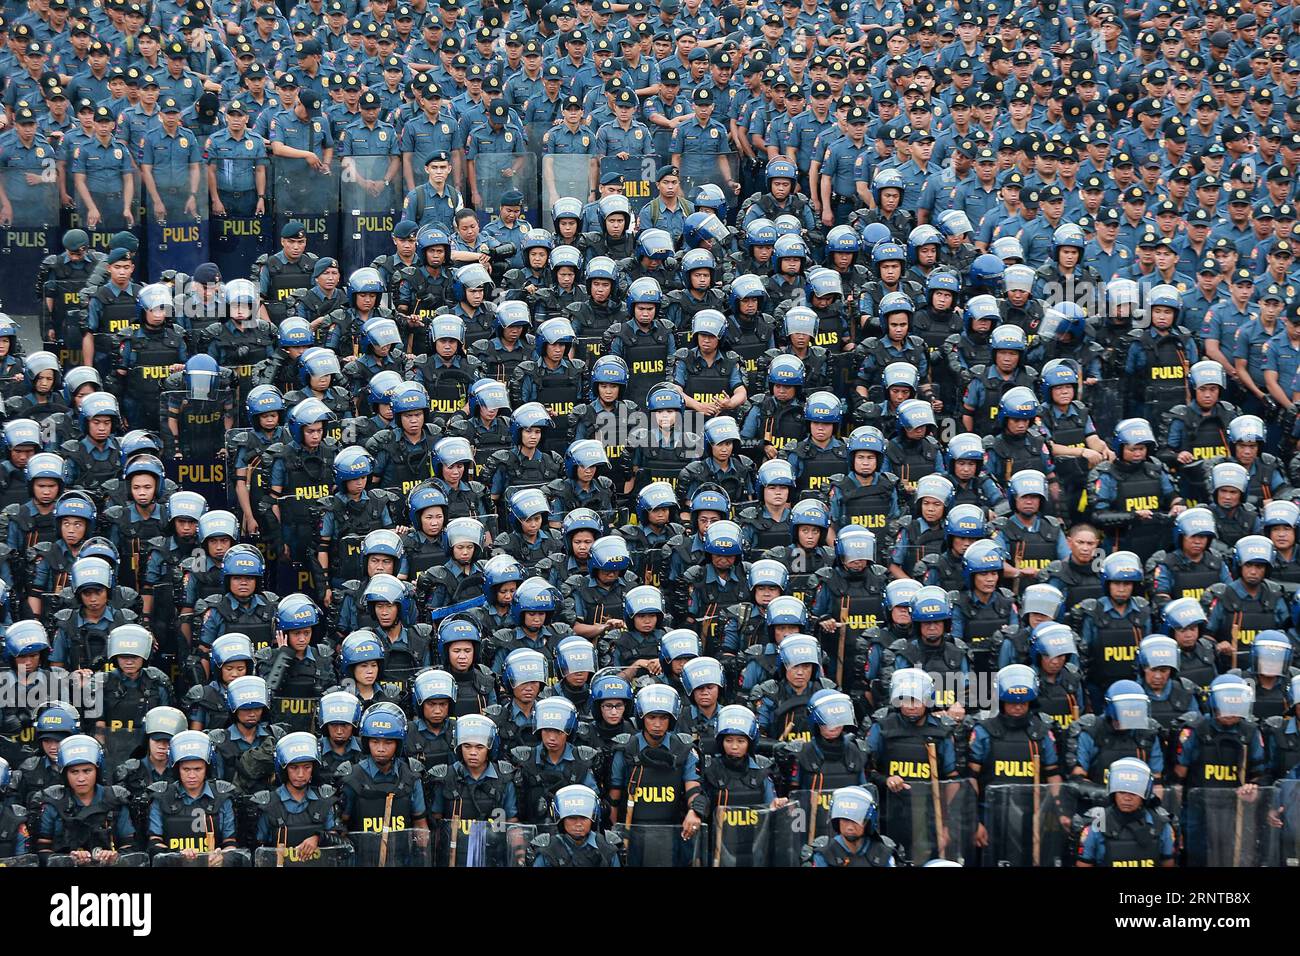 (171105) -- MANILA, Nov. 5, 2017 -- Uniformed personnel attend the send-off ceremony of security forces for the Association of Southeast Asian Nations (ASEAN) Summit in Manila, the Philippines, Nov. 5, 2017. A massive security blanket is being put in place to protect leaders who are to attend the Association of Southeast Asian Nations (ASEAN) summit, the East Asia summit and related meetings in the Philippines this month. )(yk) PHILIPPINES-MANILA-ASEAN-SECURITY ROUELLExUMALI PUBLICATIONxNOTxINxCHN Stock Photo